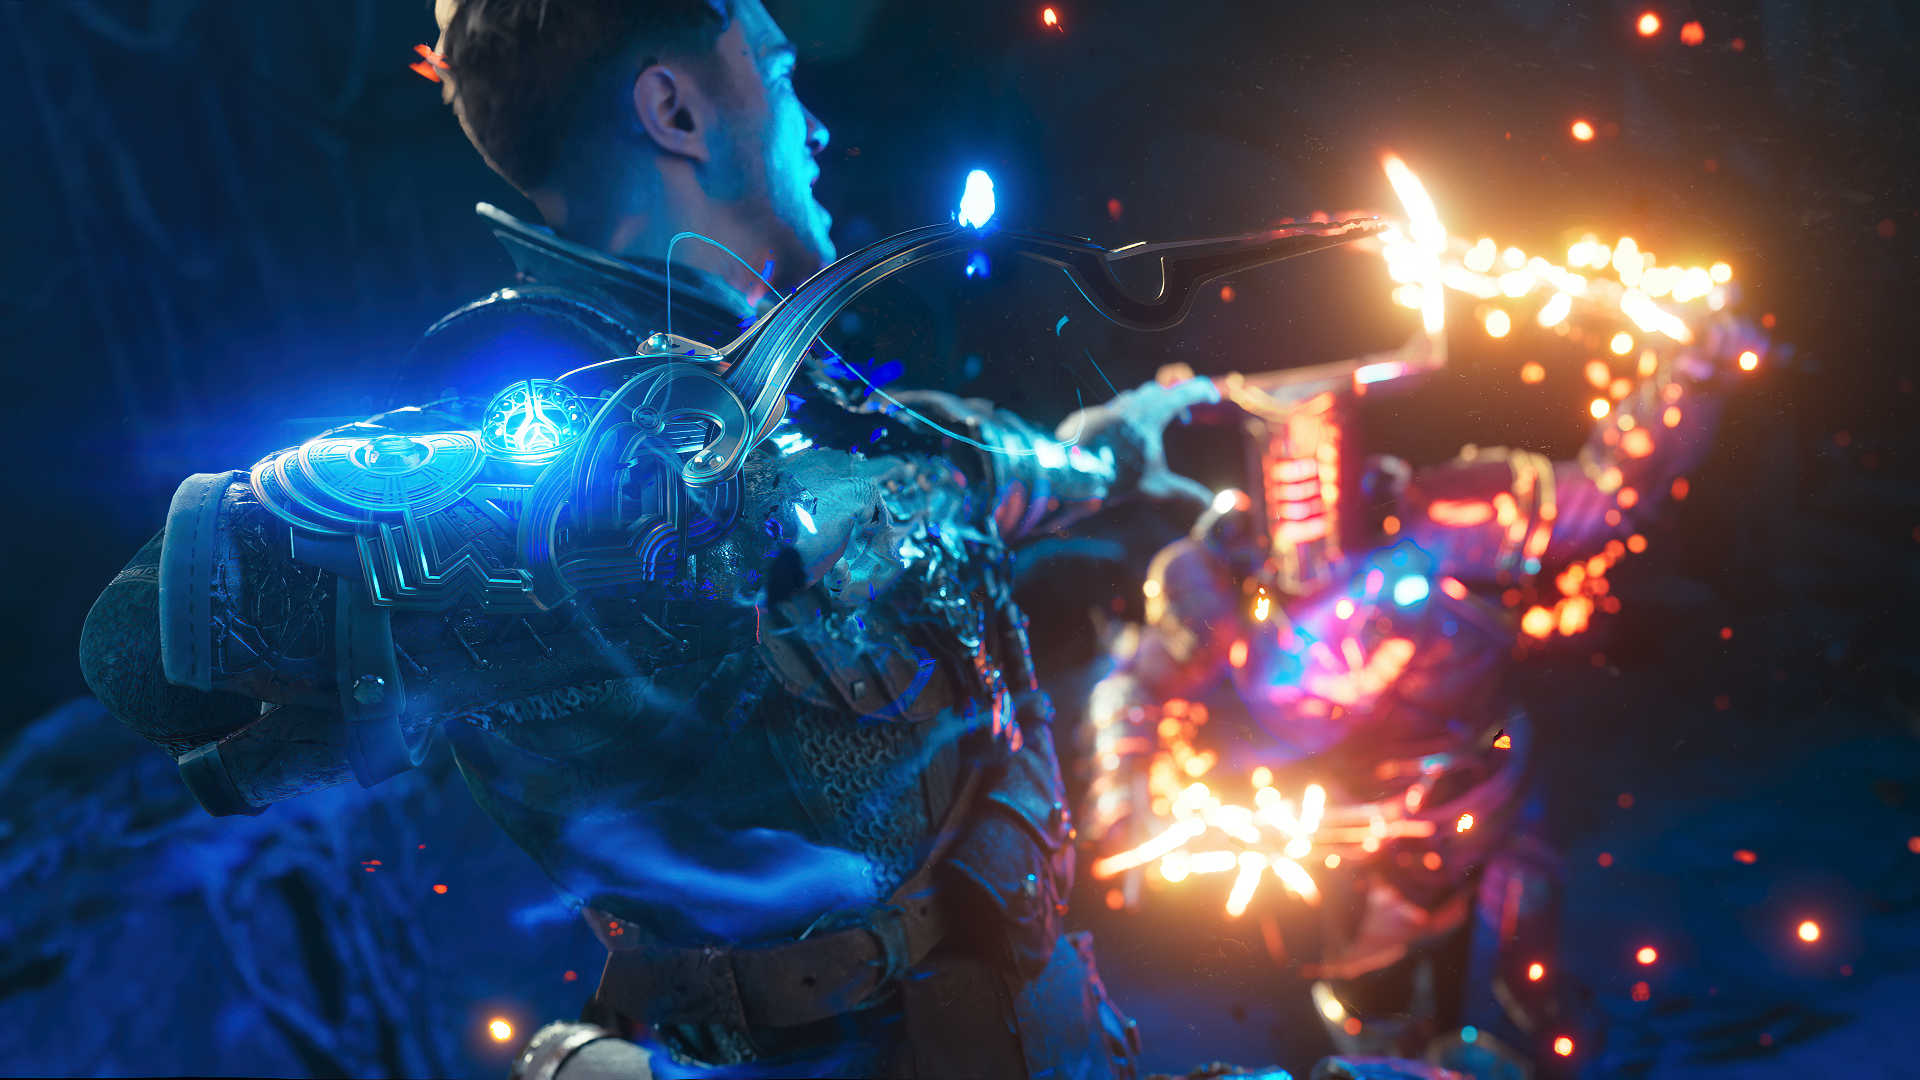 EA and Ascendant Studios Unveil Immortals of Aveum™, an All-New Single  Player Magic Shooter Launching July 20, 2023